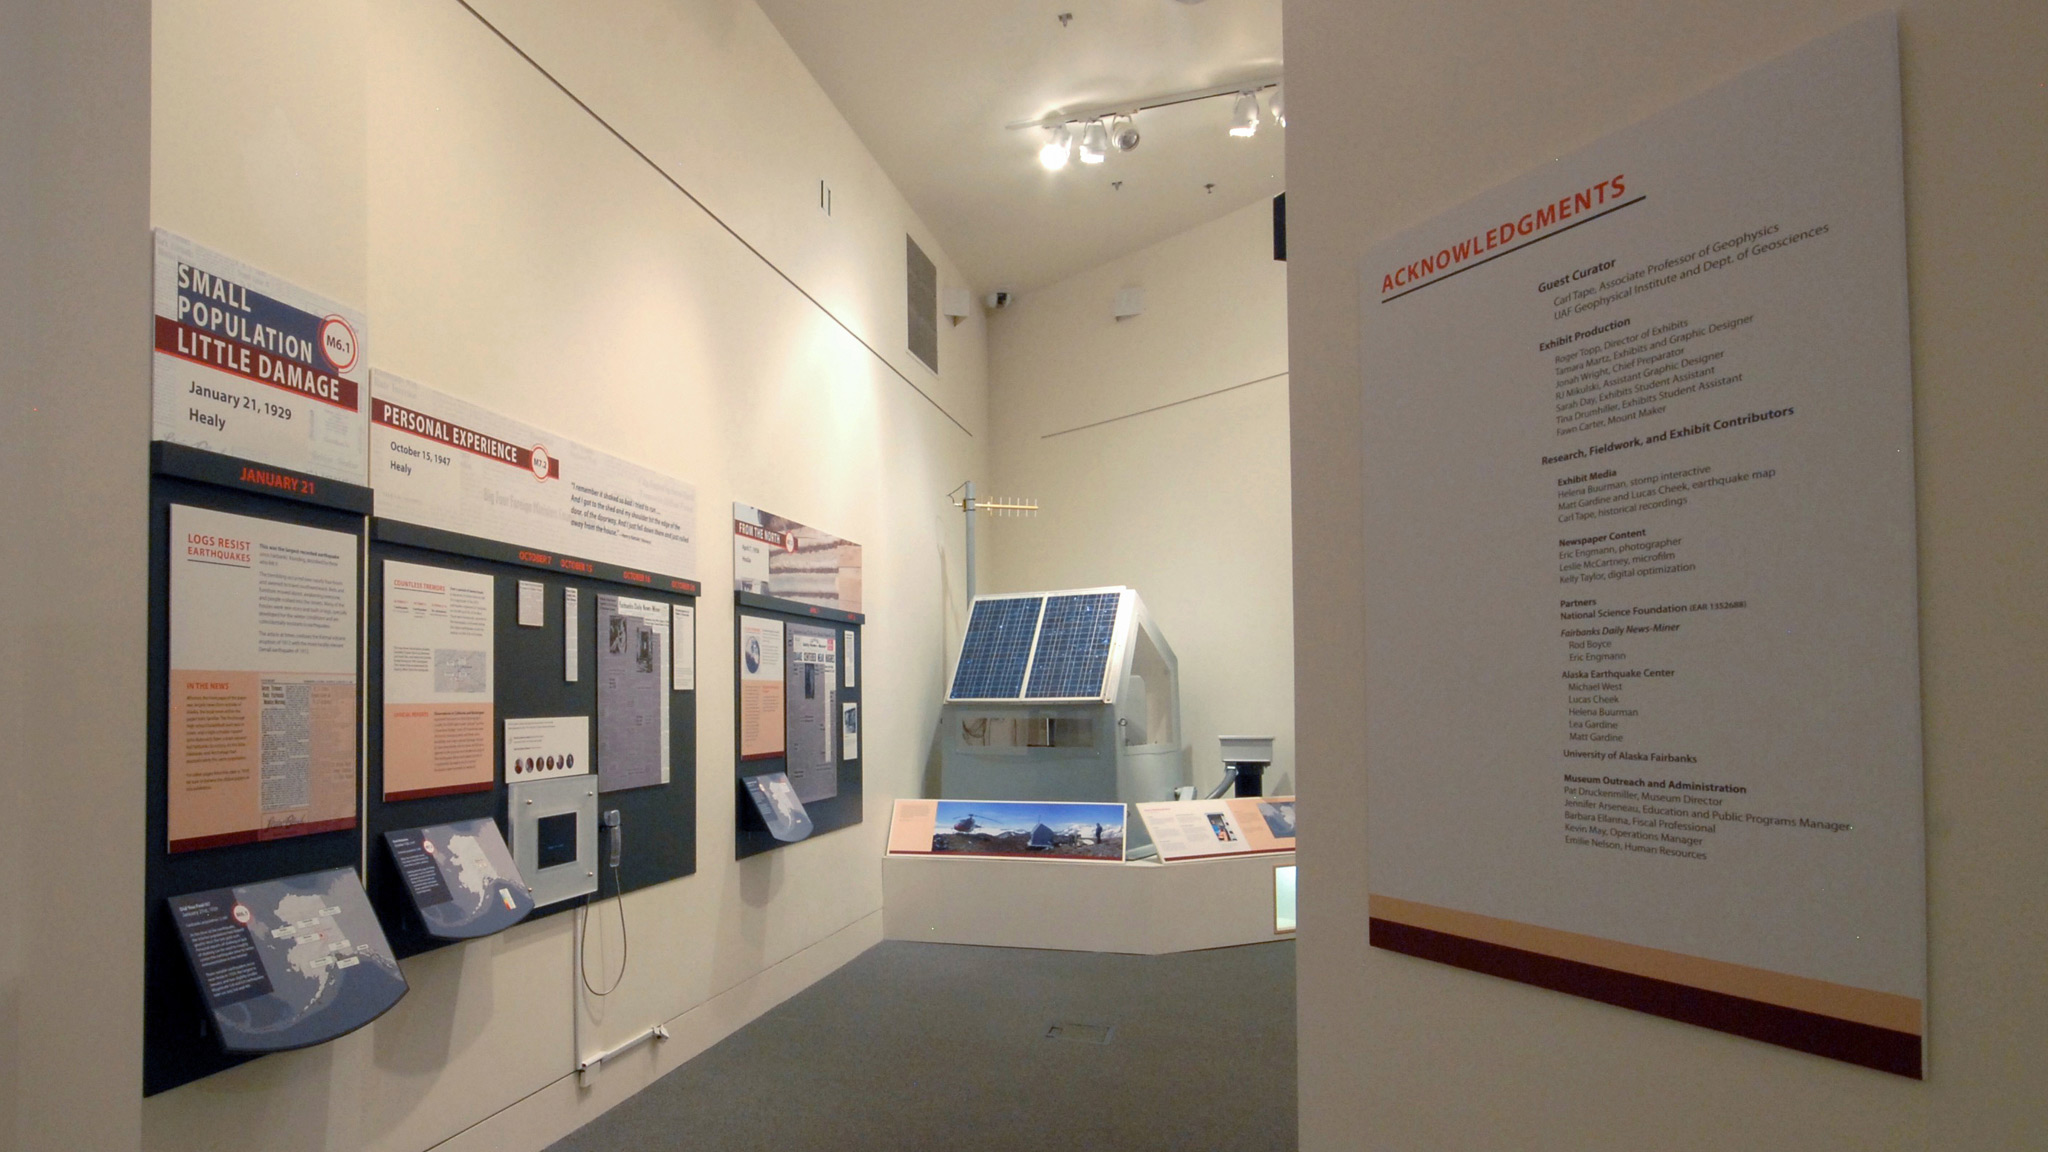 Looking along the north wall of the gallery and the exhibits for the 1929, 1947, and 1958 earthquake events.